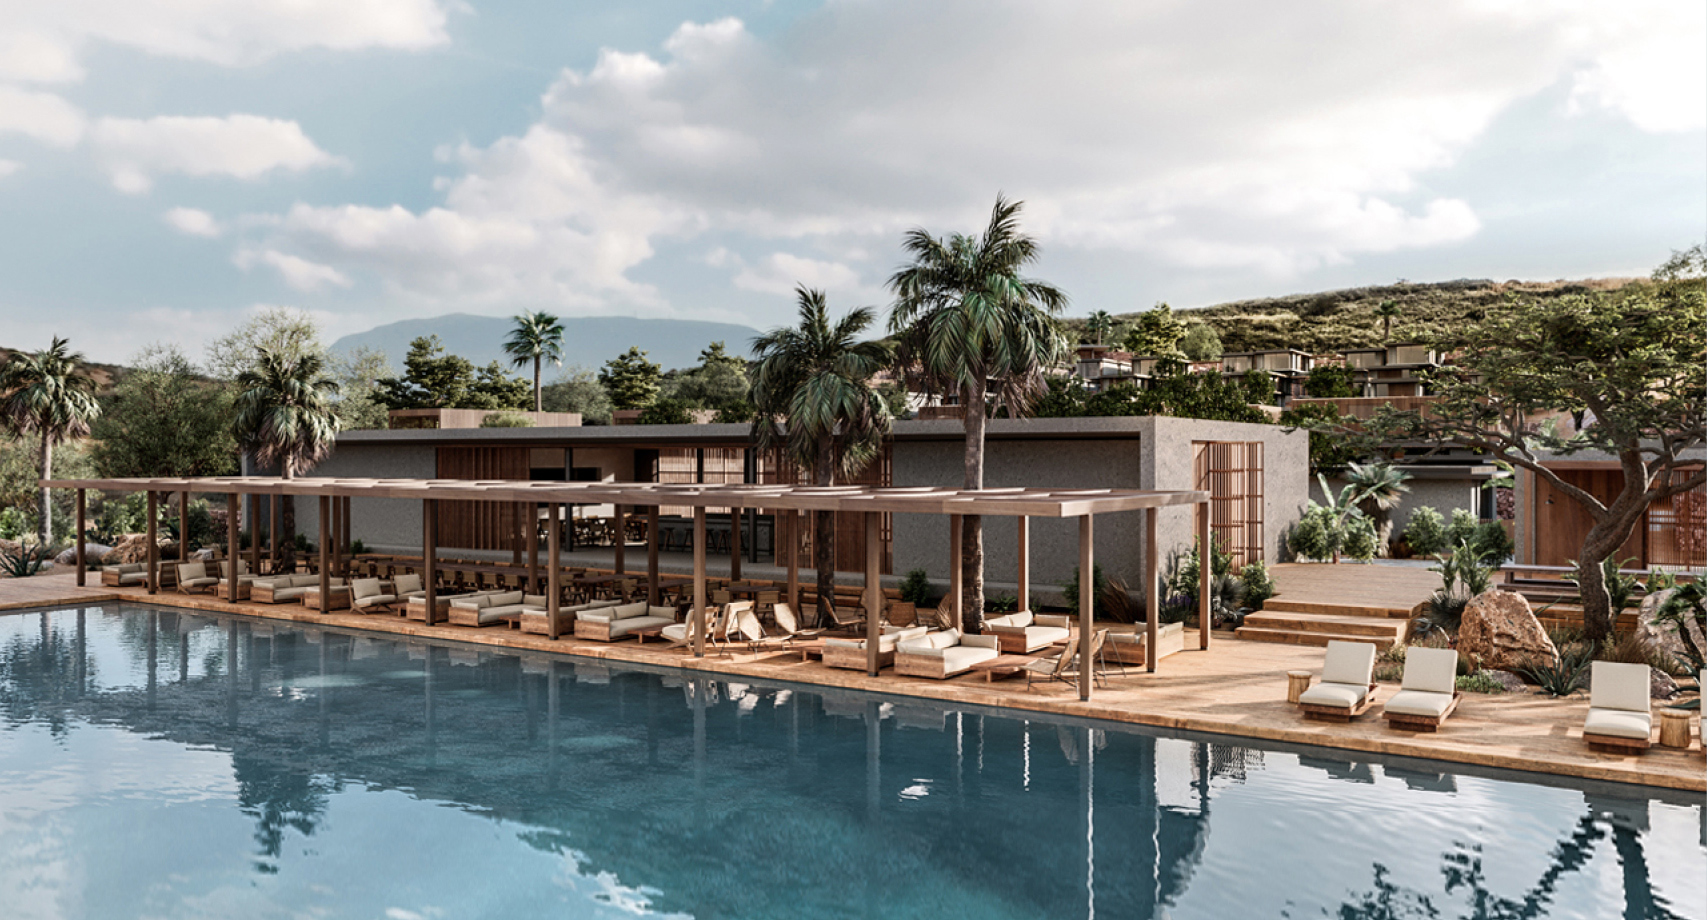 Casa Cook Chania, the new Casa Cook hotel but this time for families.  Newly built in Crete, it will open its doors in September 2019.  Rooms have private pools and can all have one, two or three children.